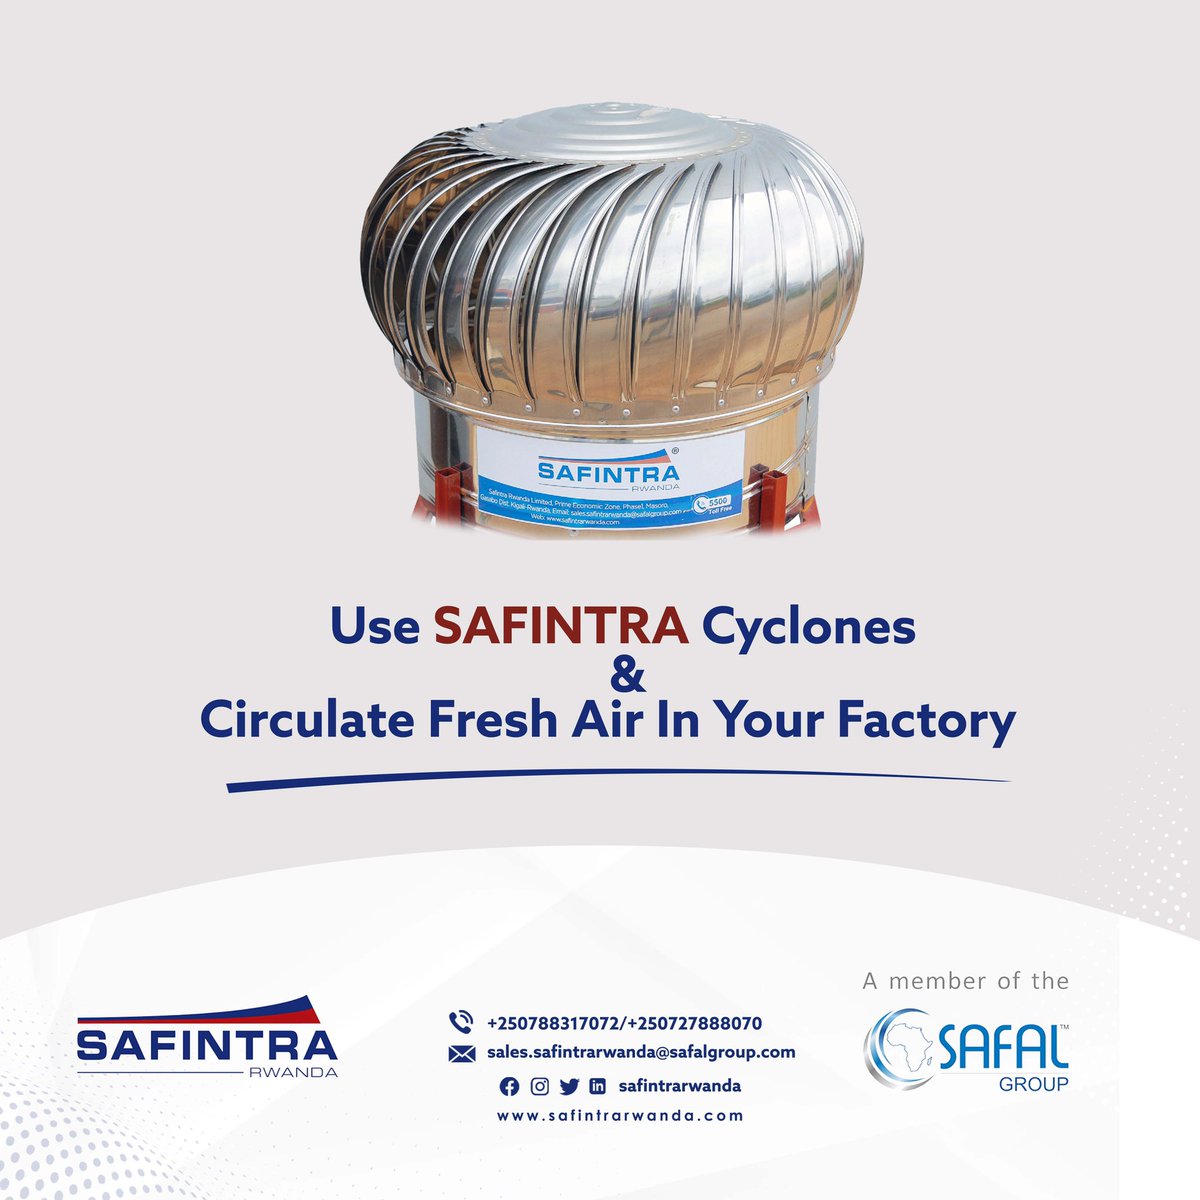 Increase productivity of the workers by removing hot and polluted air from the factory by using Safintra’s steel cyclones. 
#safintraroof #buildingsolution #safintrarwanda #cyclones #constructionmaterial